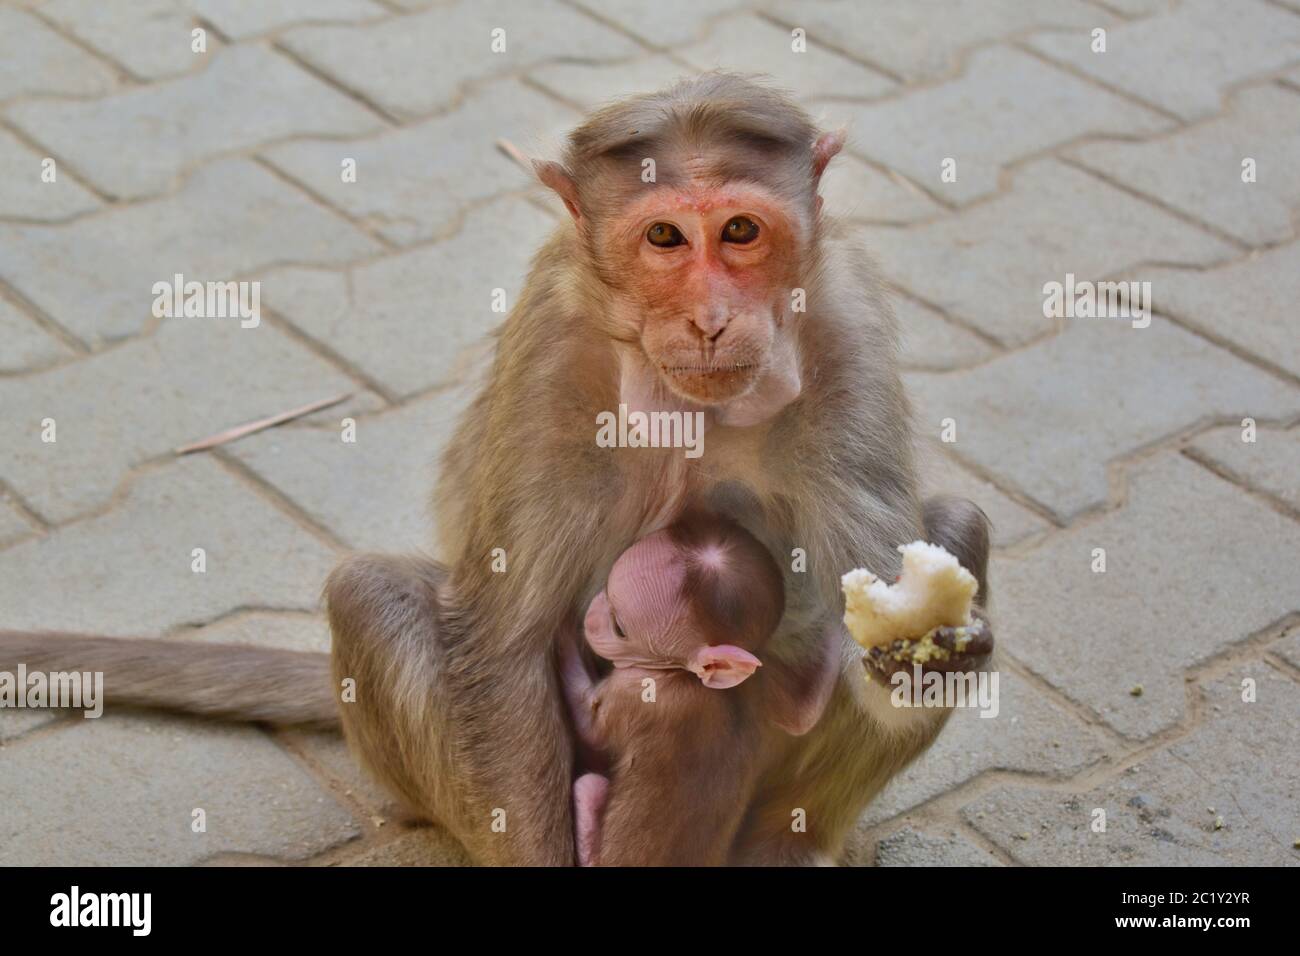 A monkey eating idli with its baby sitting or hugging its mother ,the monkey is looking at the camera with expressive eyes Stock Photo